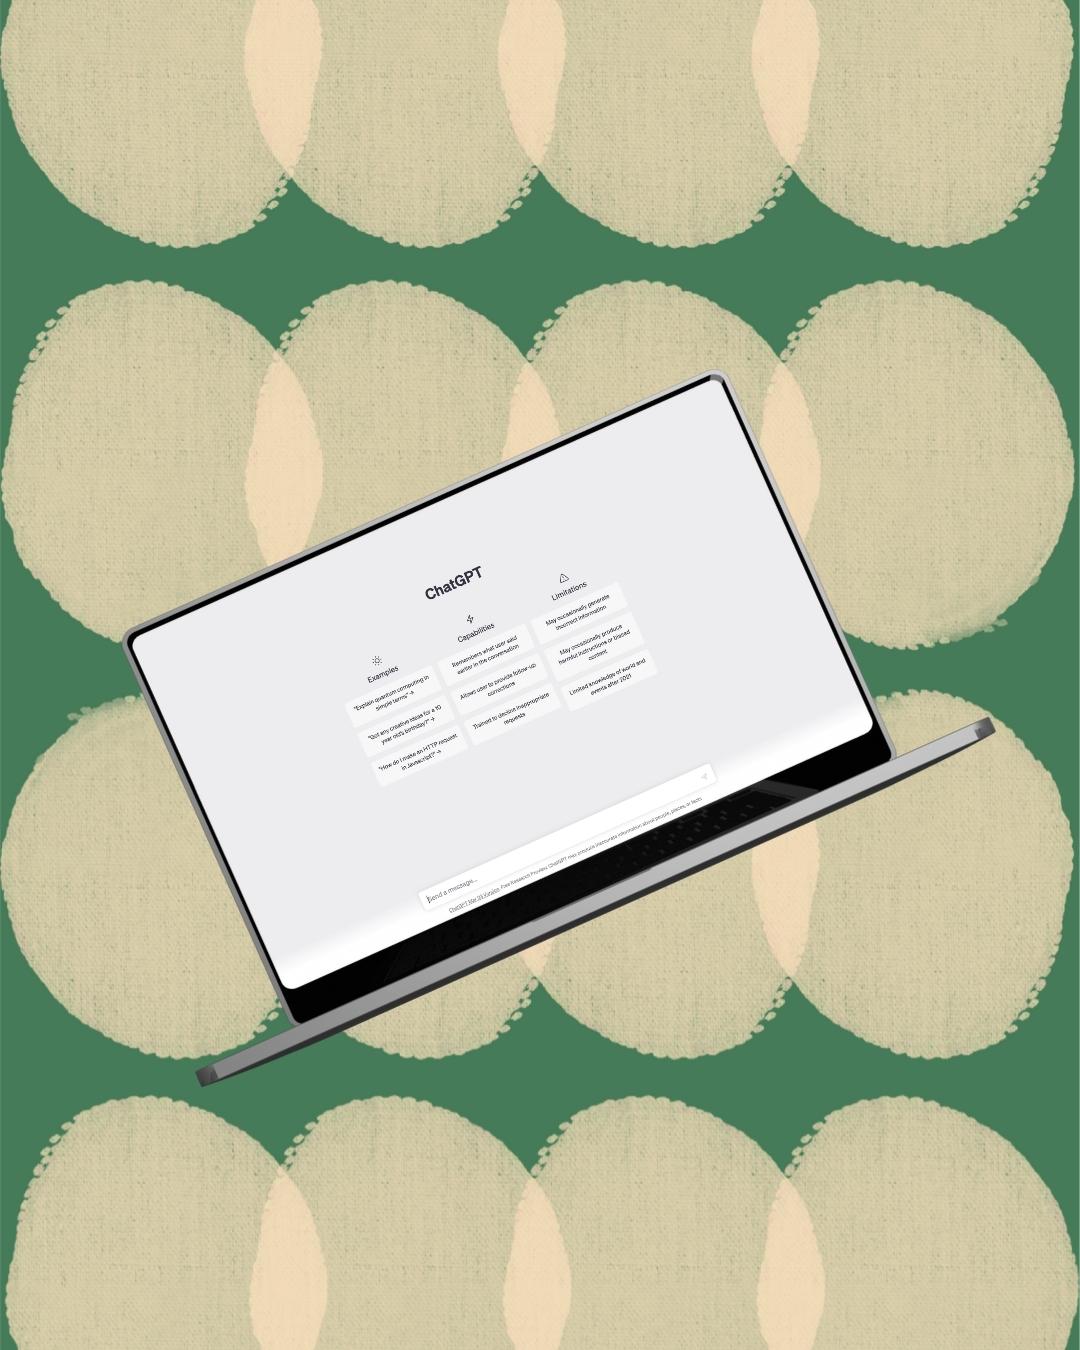 A green and cream coloured background texture, with a laptop that has the ChatGPT on the screen.